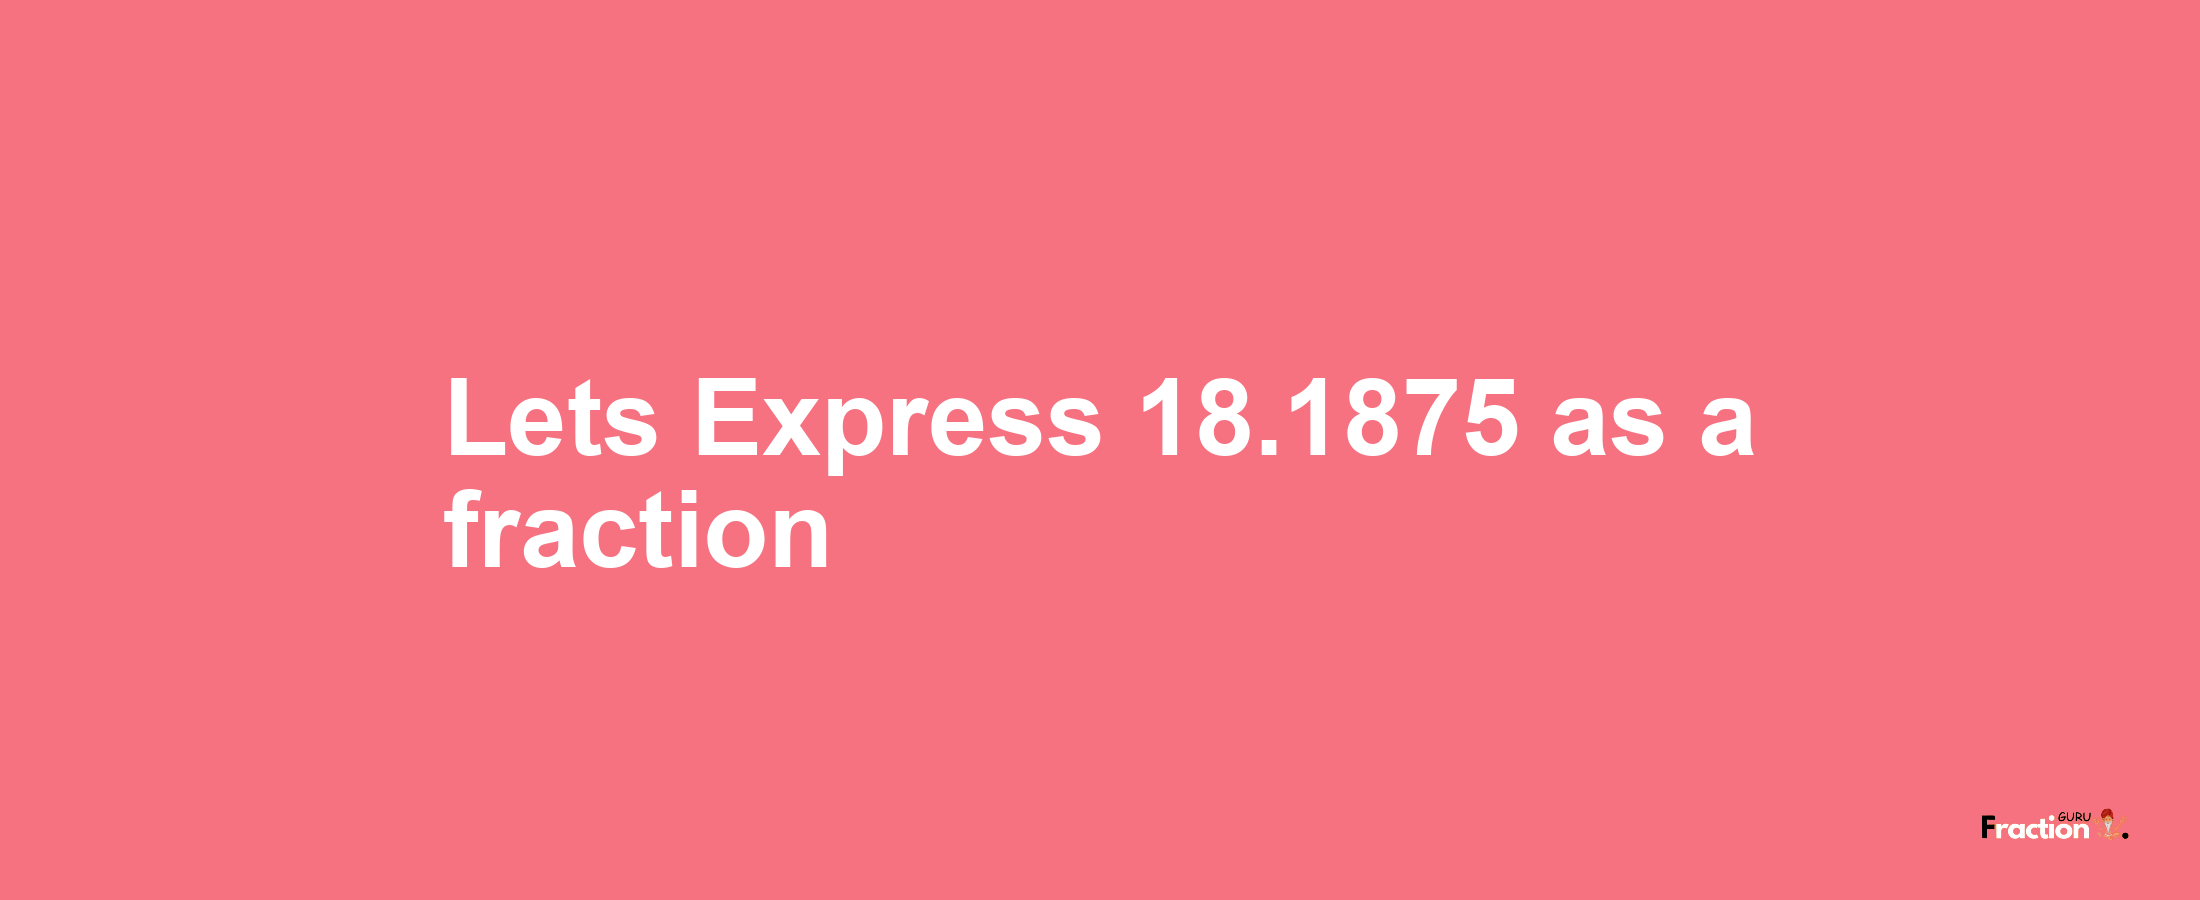 Lets Express 18.1875 as afraction